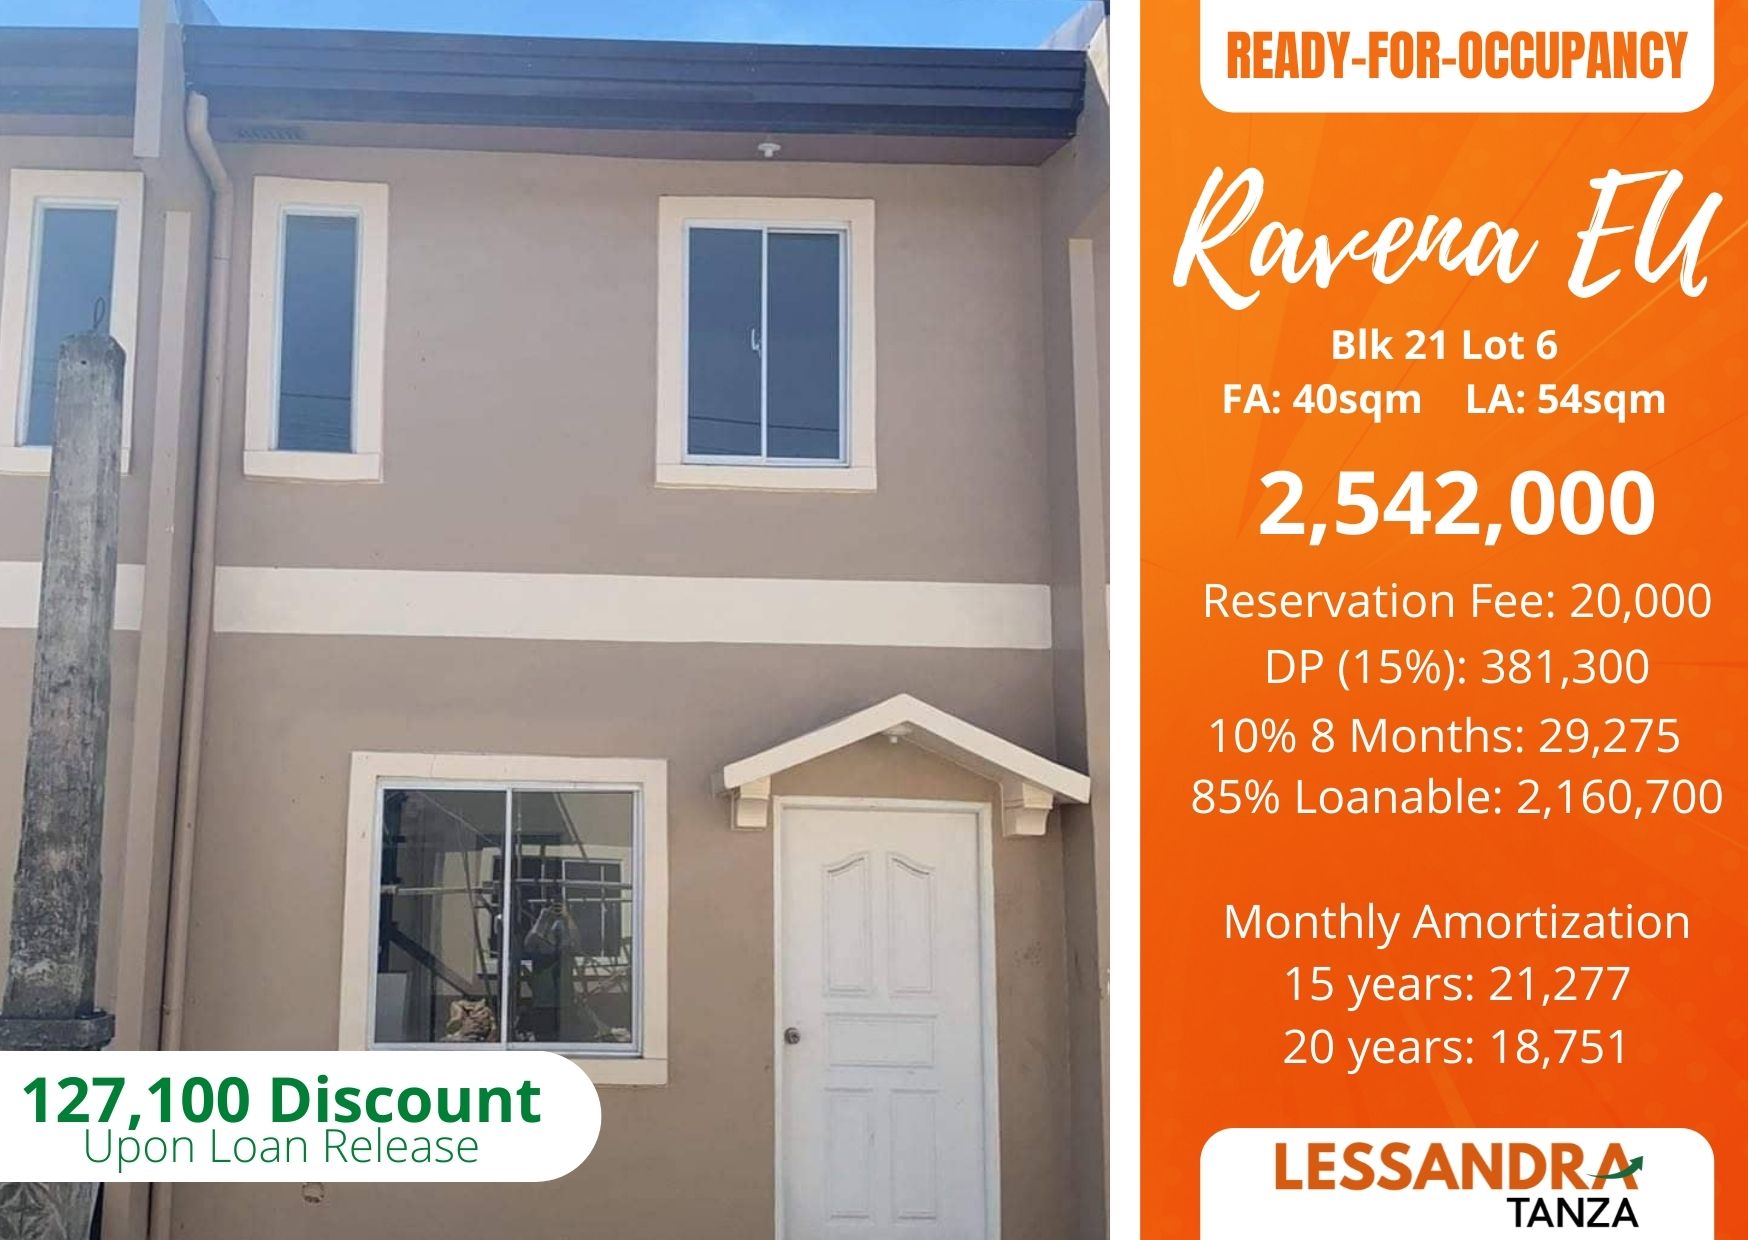 Affordable House and Lot in Tanza Ravena EU RFO